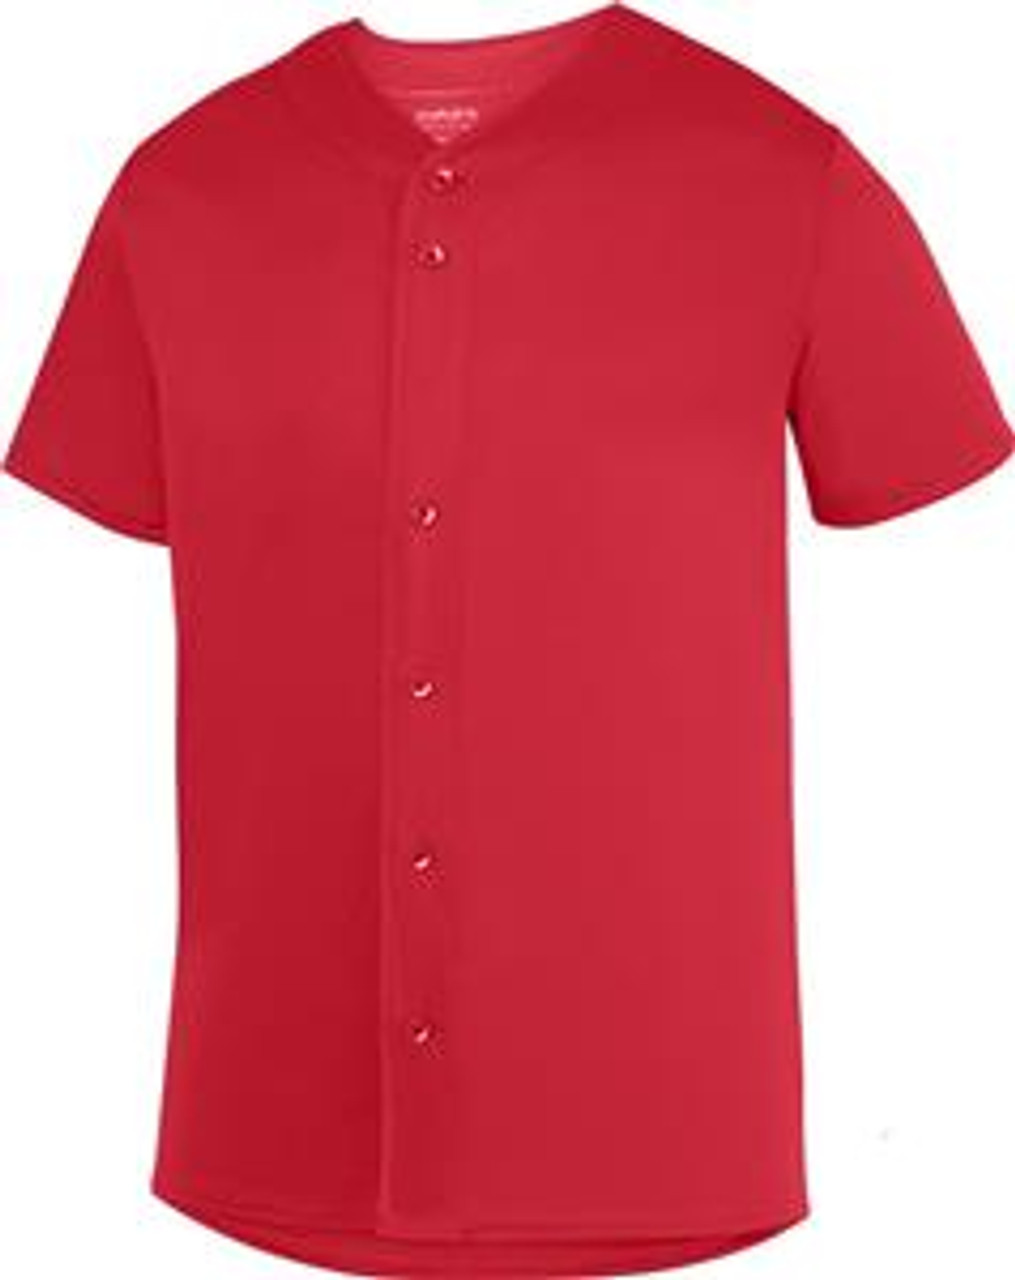 red button up jersey